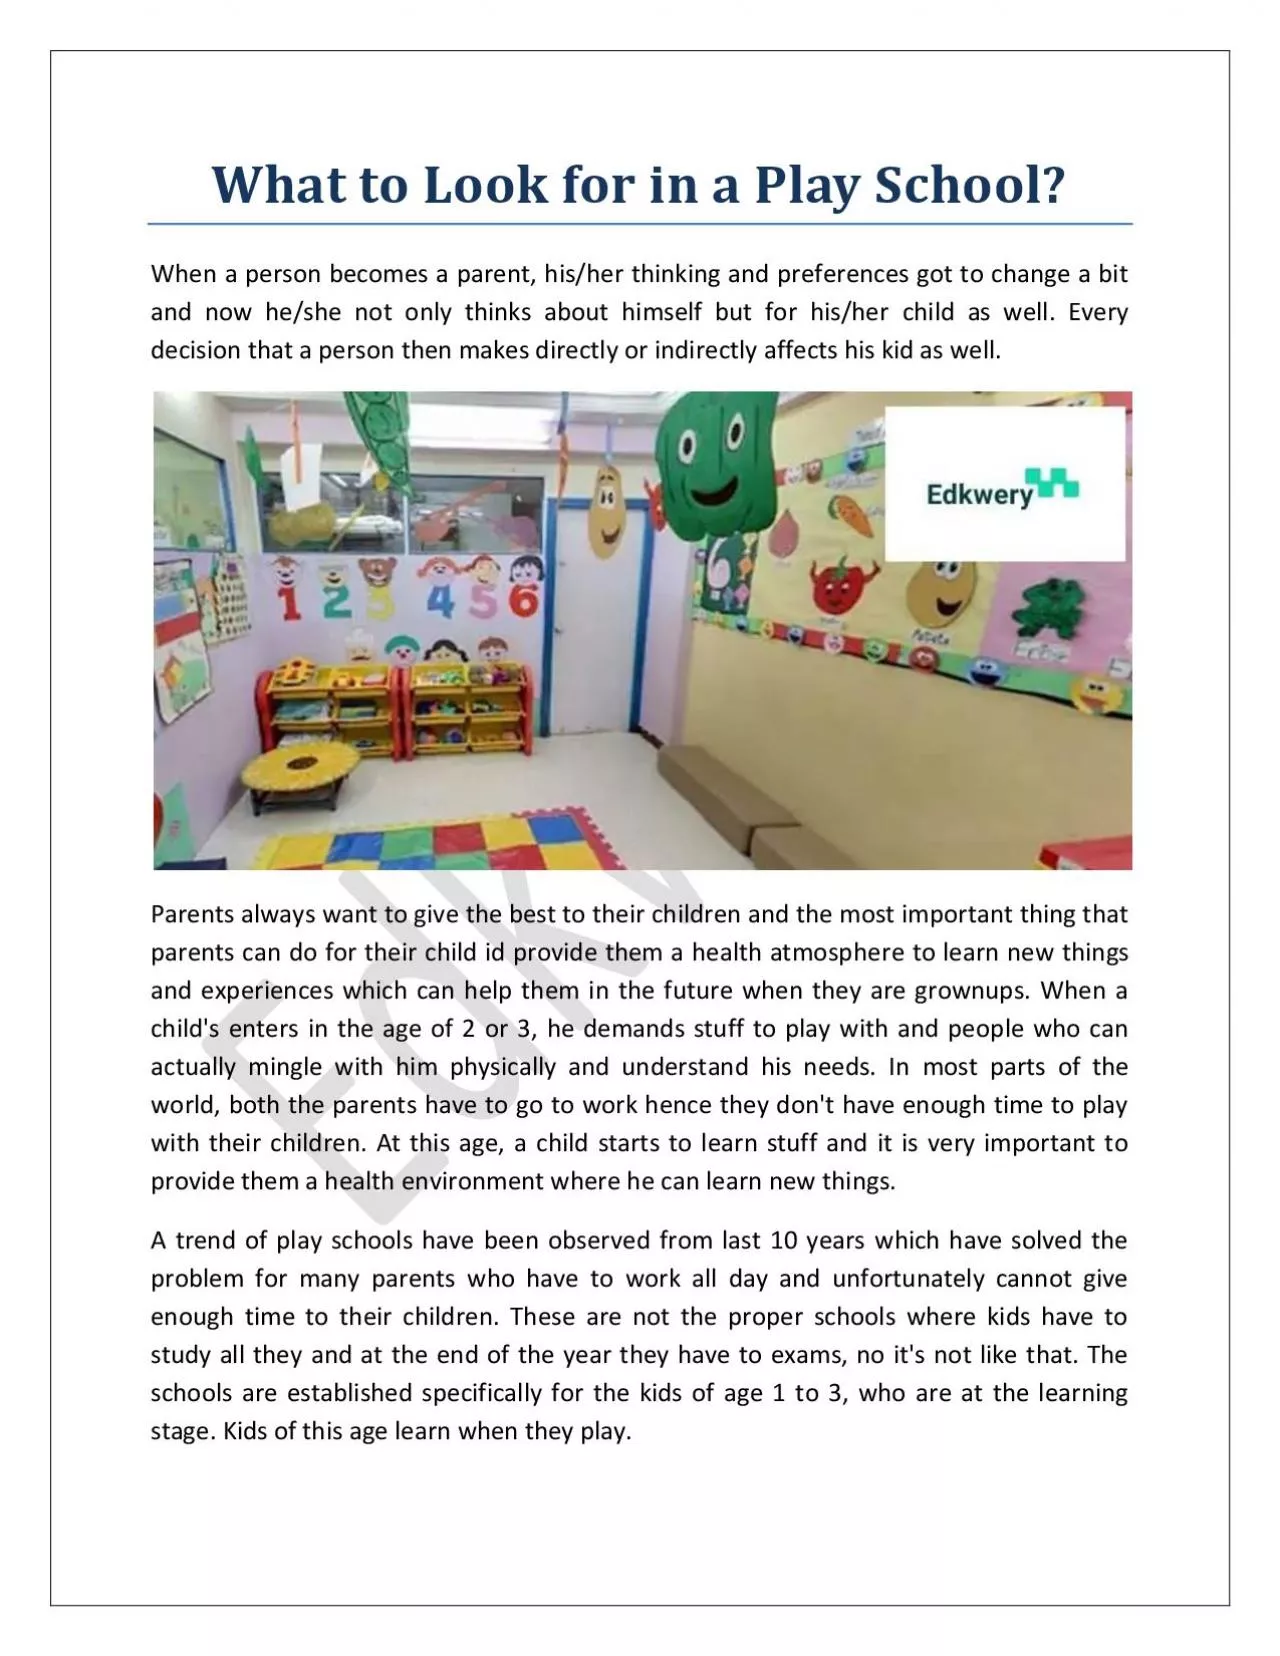 What to Look for in a Play School?